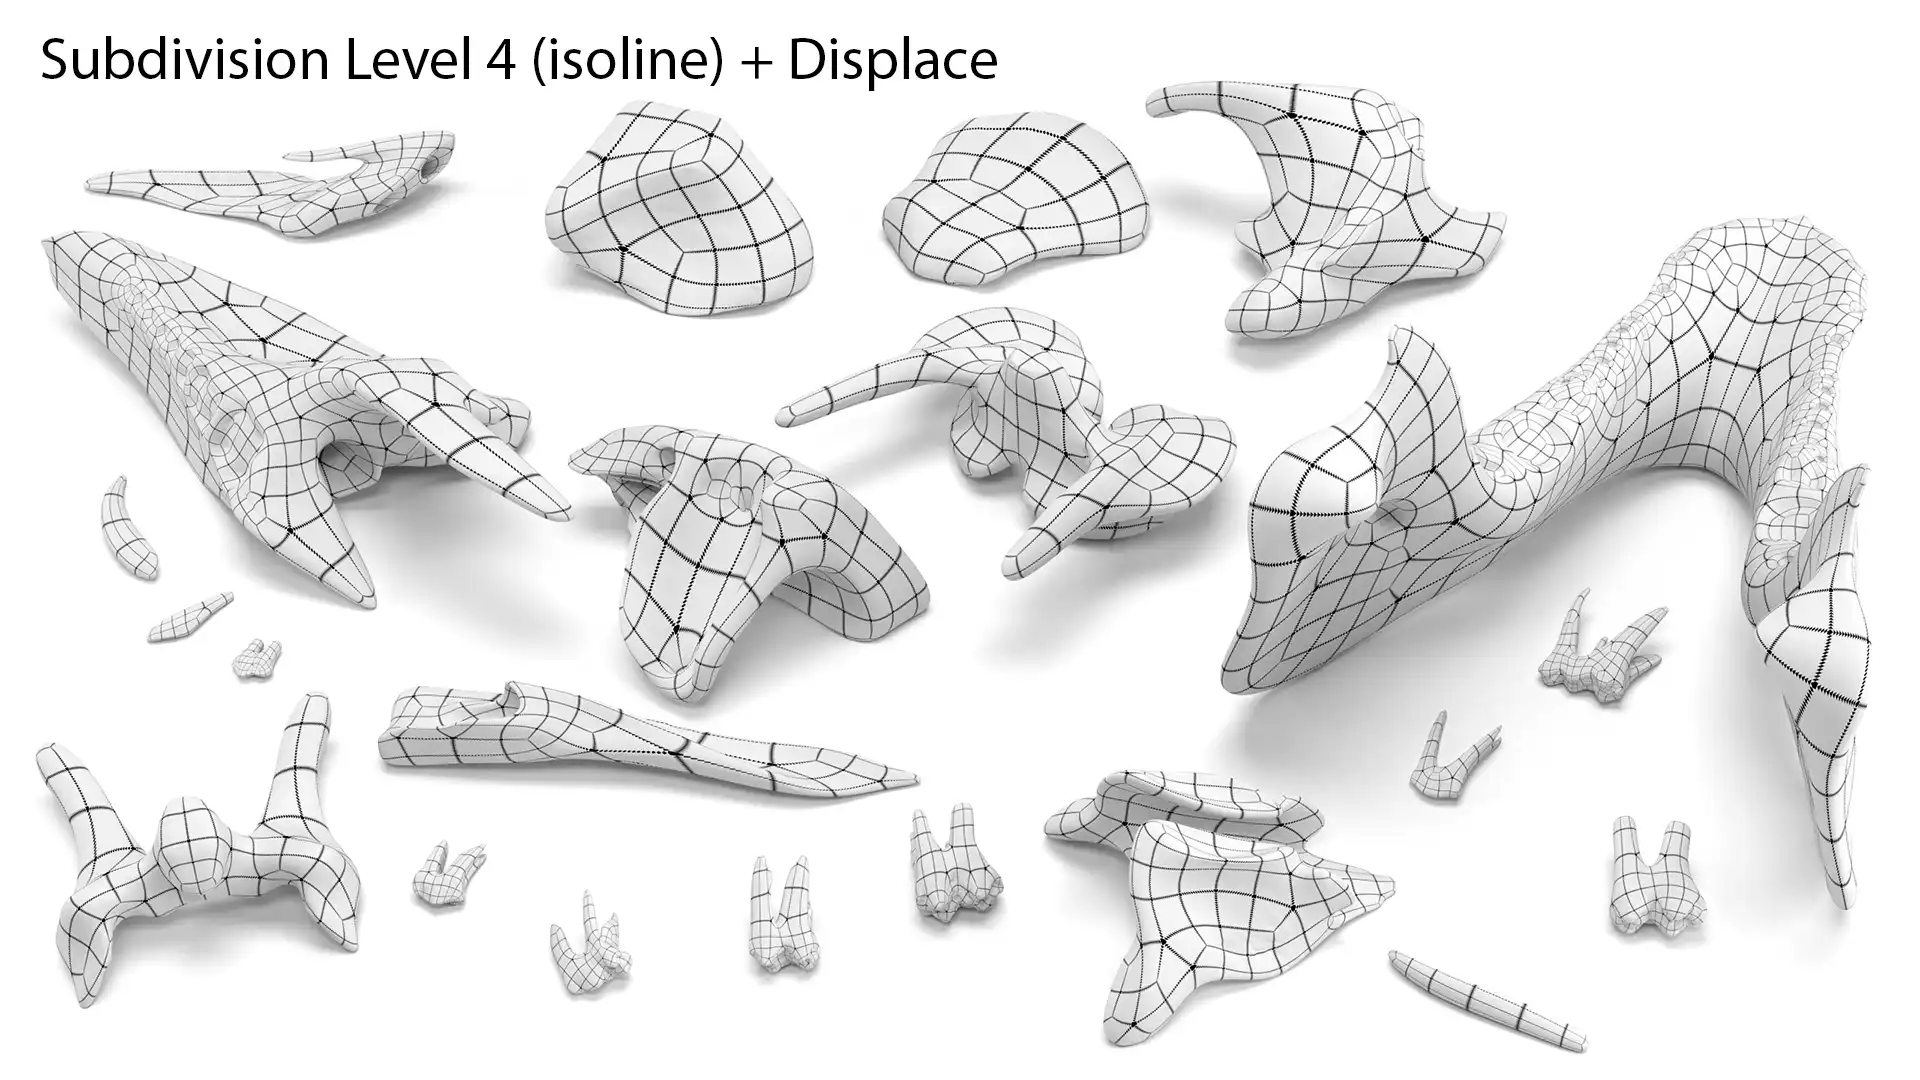 Isoline wireframe rendering of pig skull 3d model disassembled into parts Incisive, Parietal, Nuchal, Temporal, Maxilla - Zygomatic, Occipital, Mandible, Frontal, Nasal, Vomer, Palatinum and Incisors, Molars, Premolars teeth.